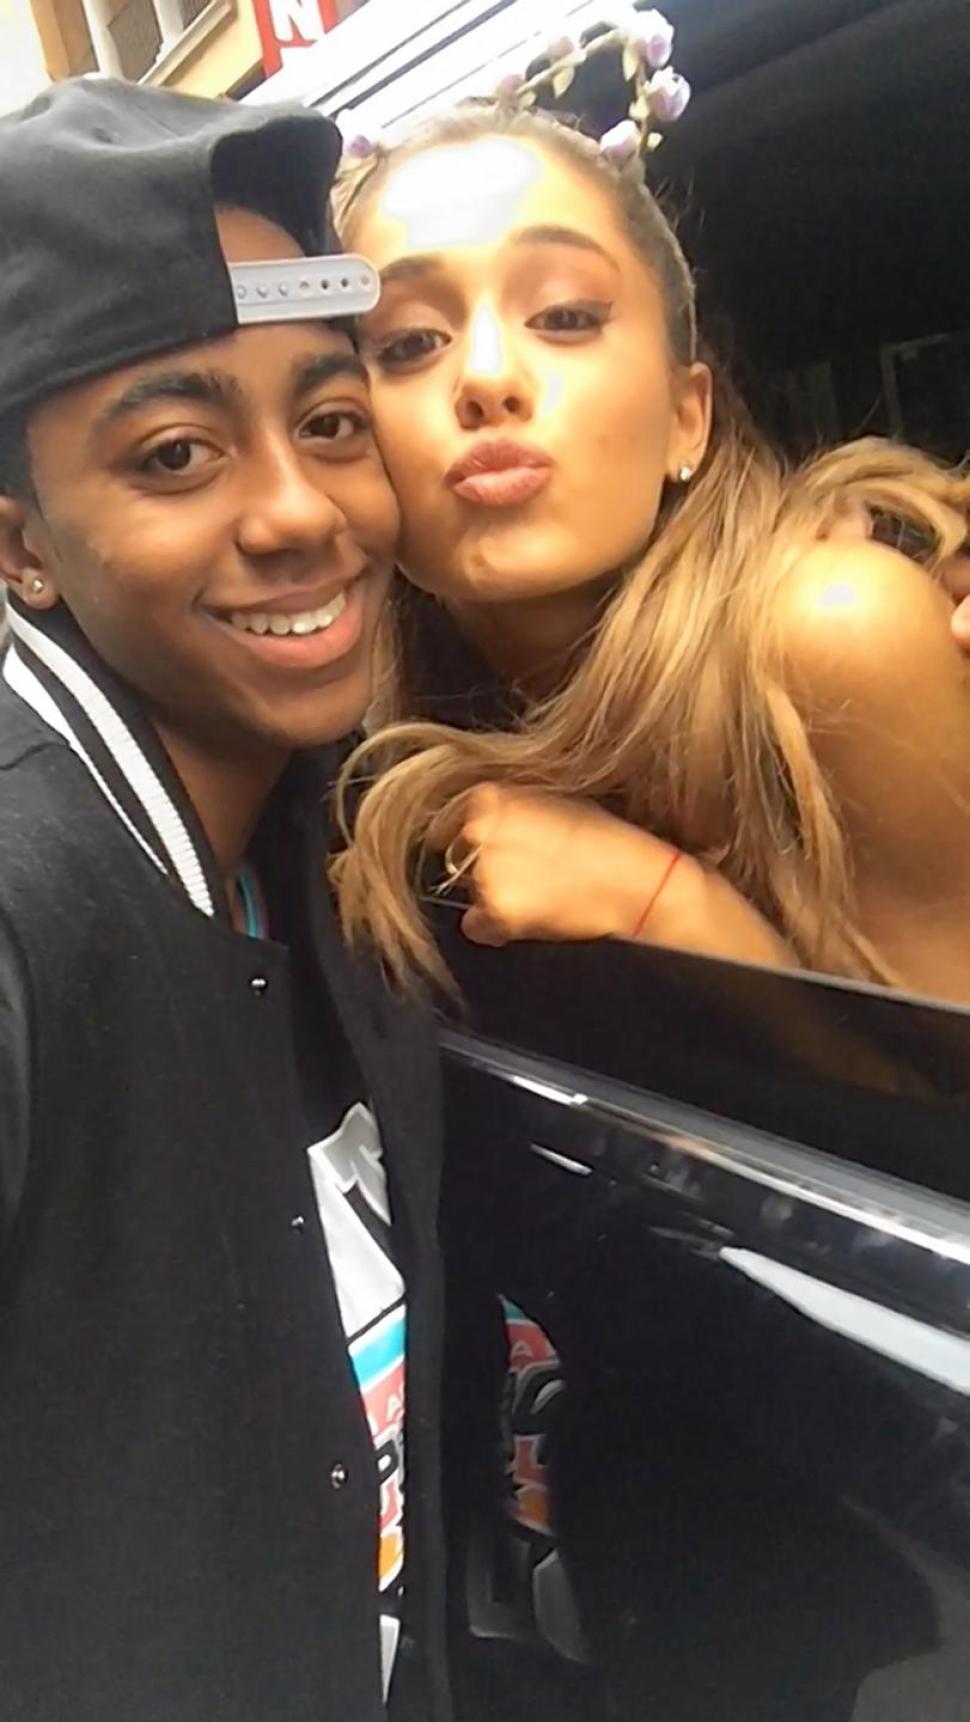 Ariana Grande obliged fans with a lengthy picture session for selfies in New York on Monday.